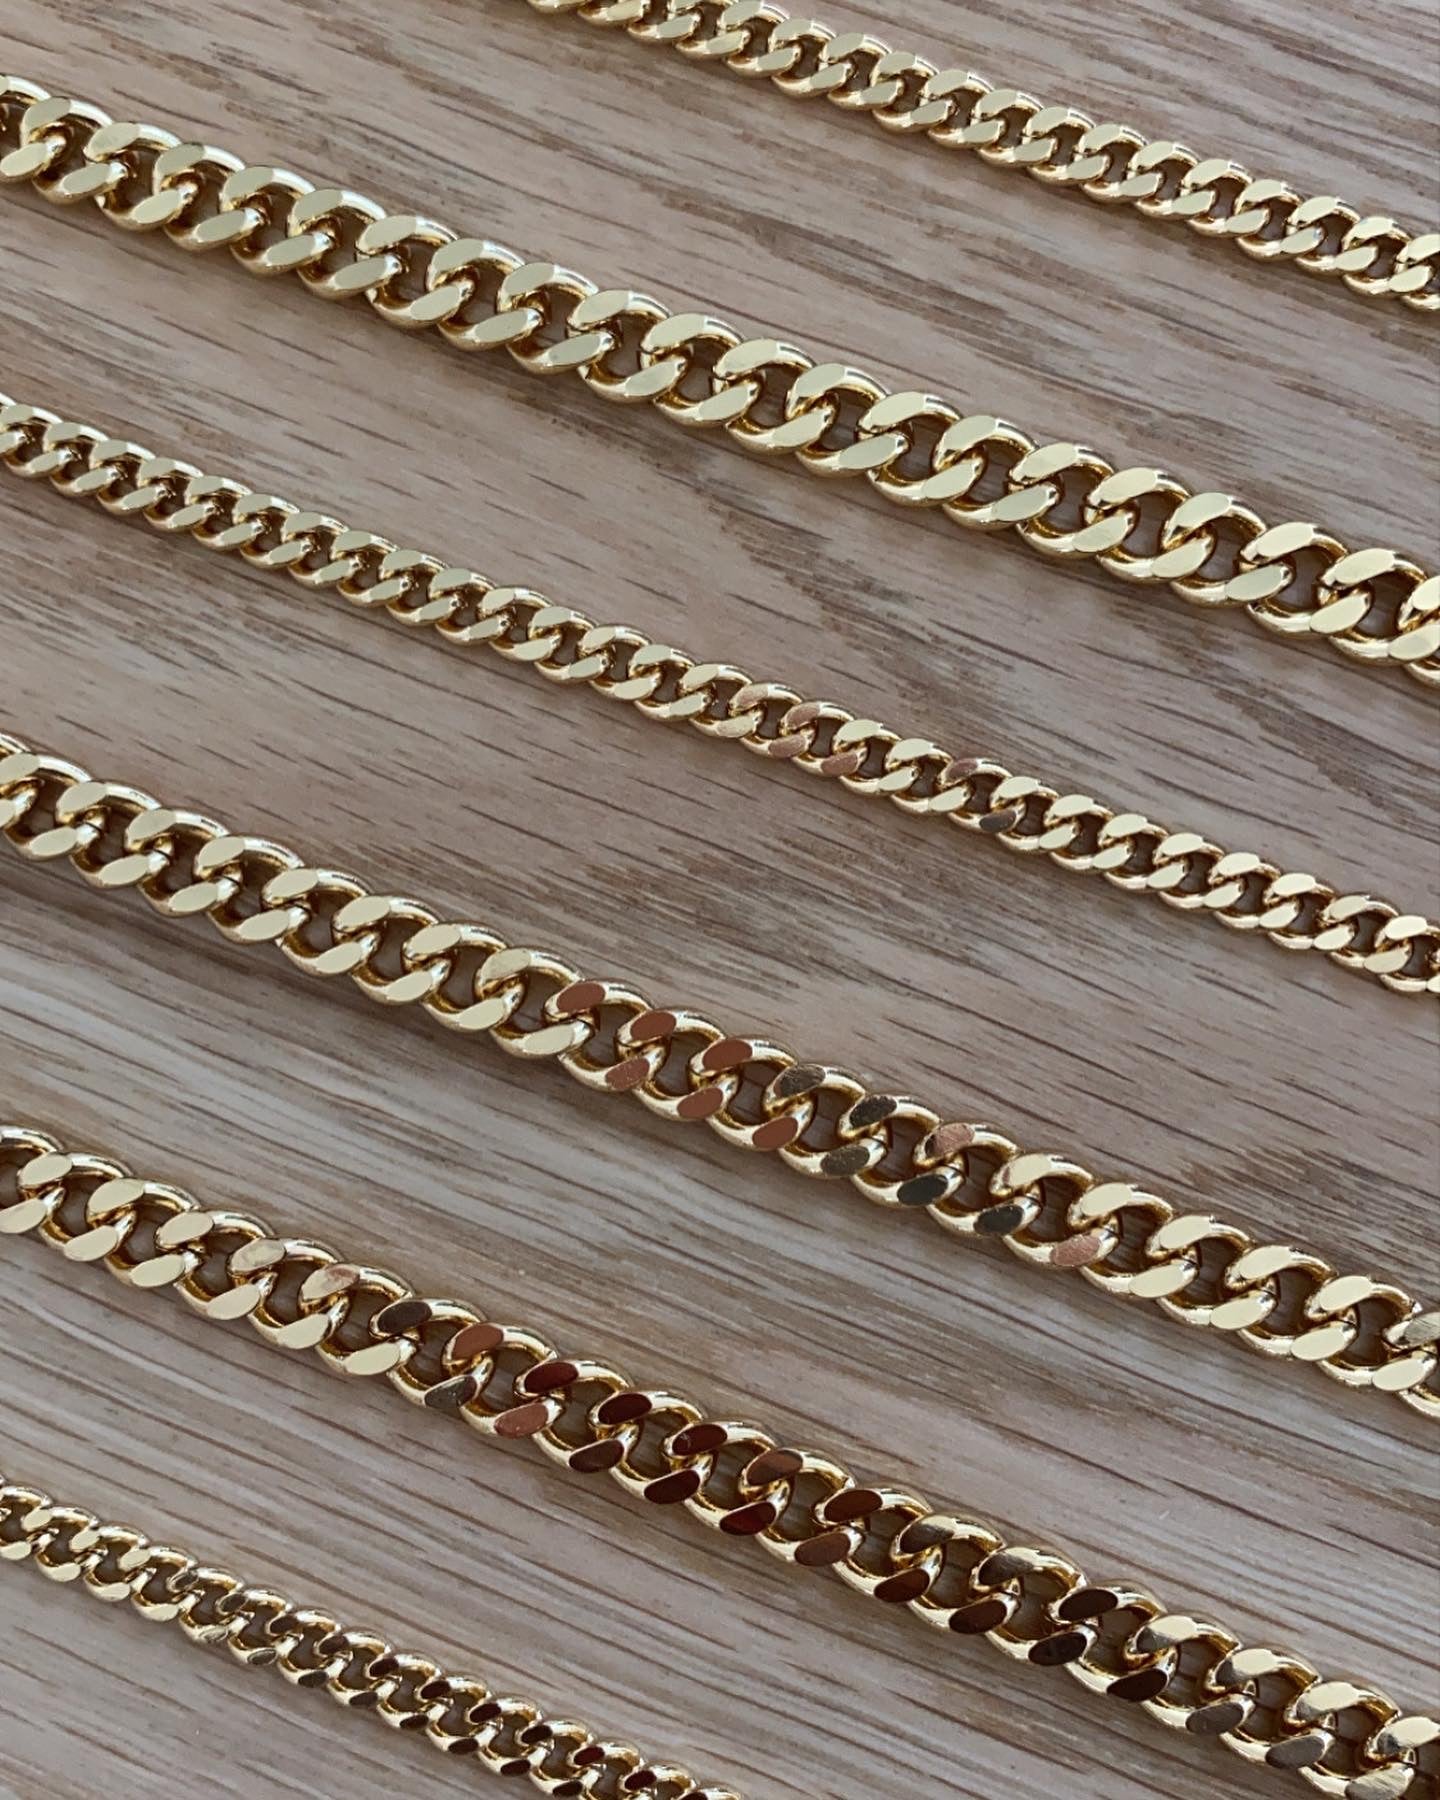 THE CUBAN LINK COLLECTION